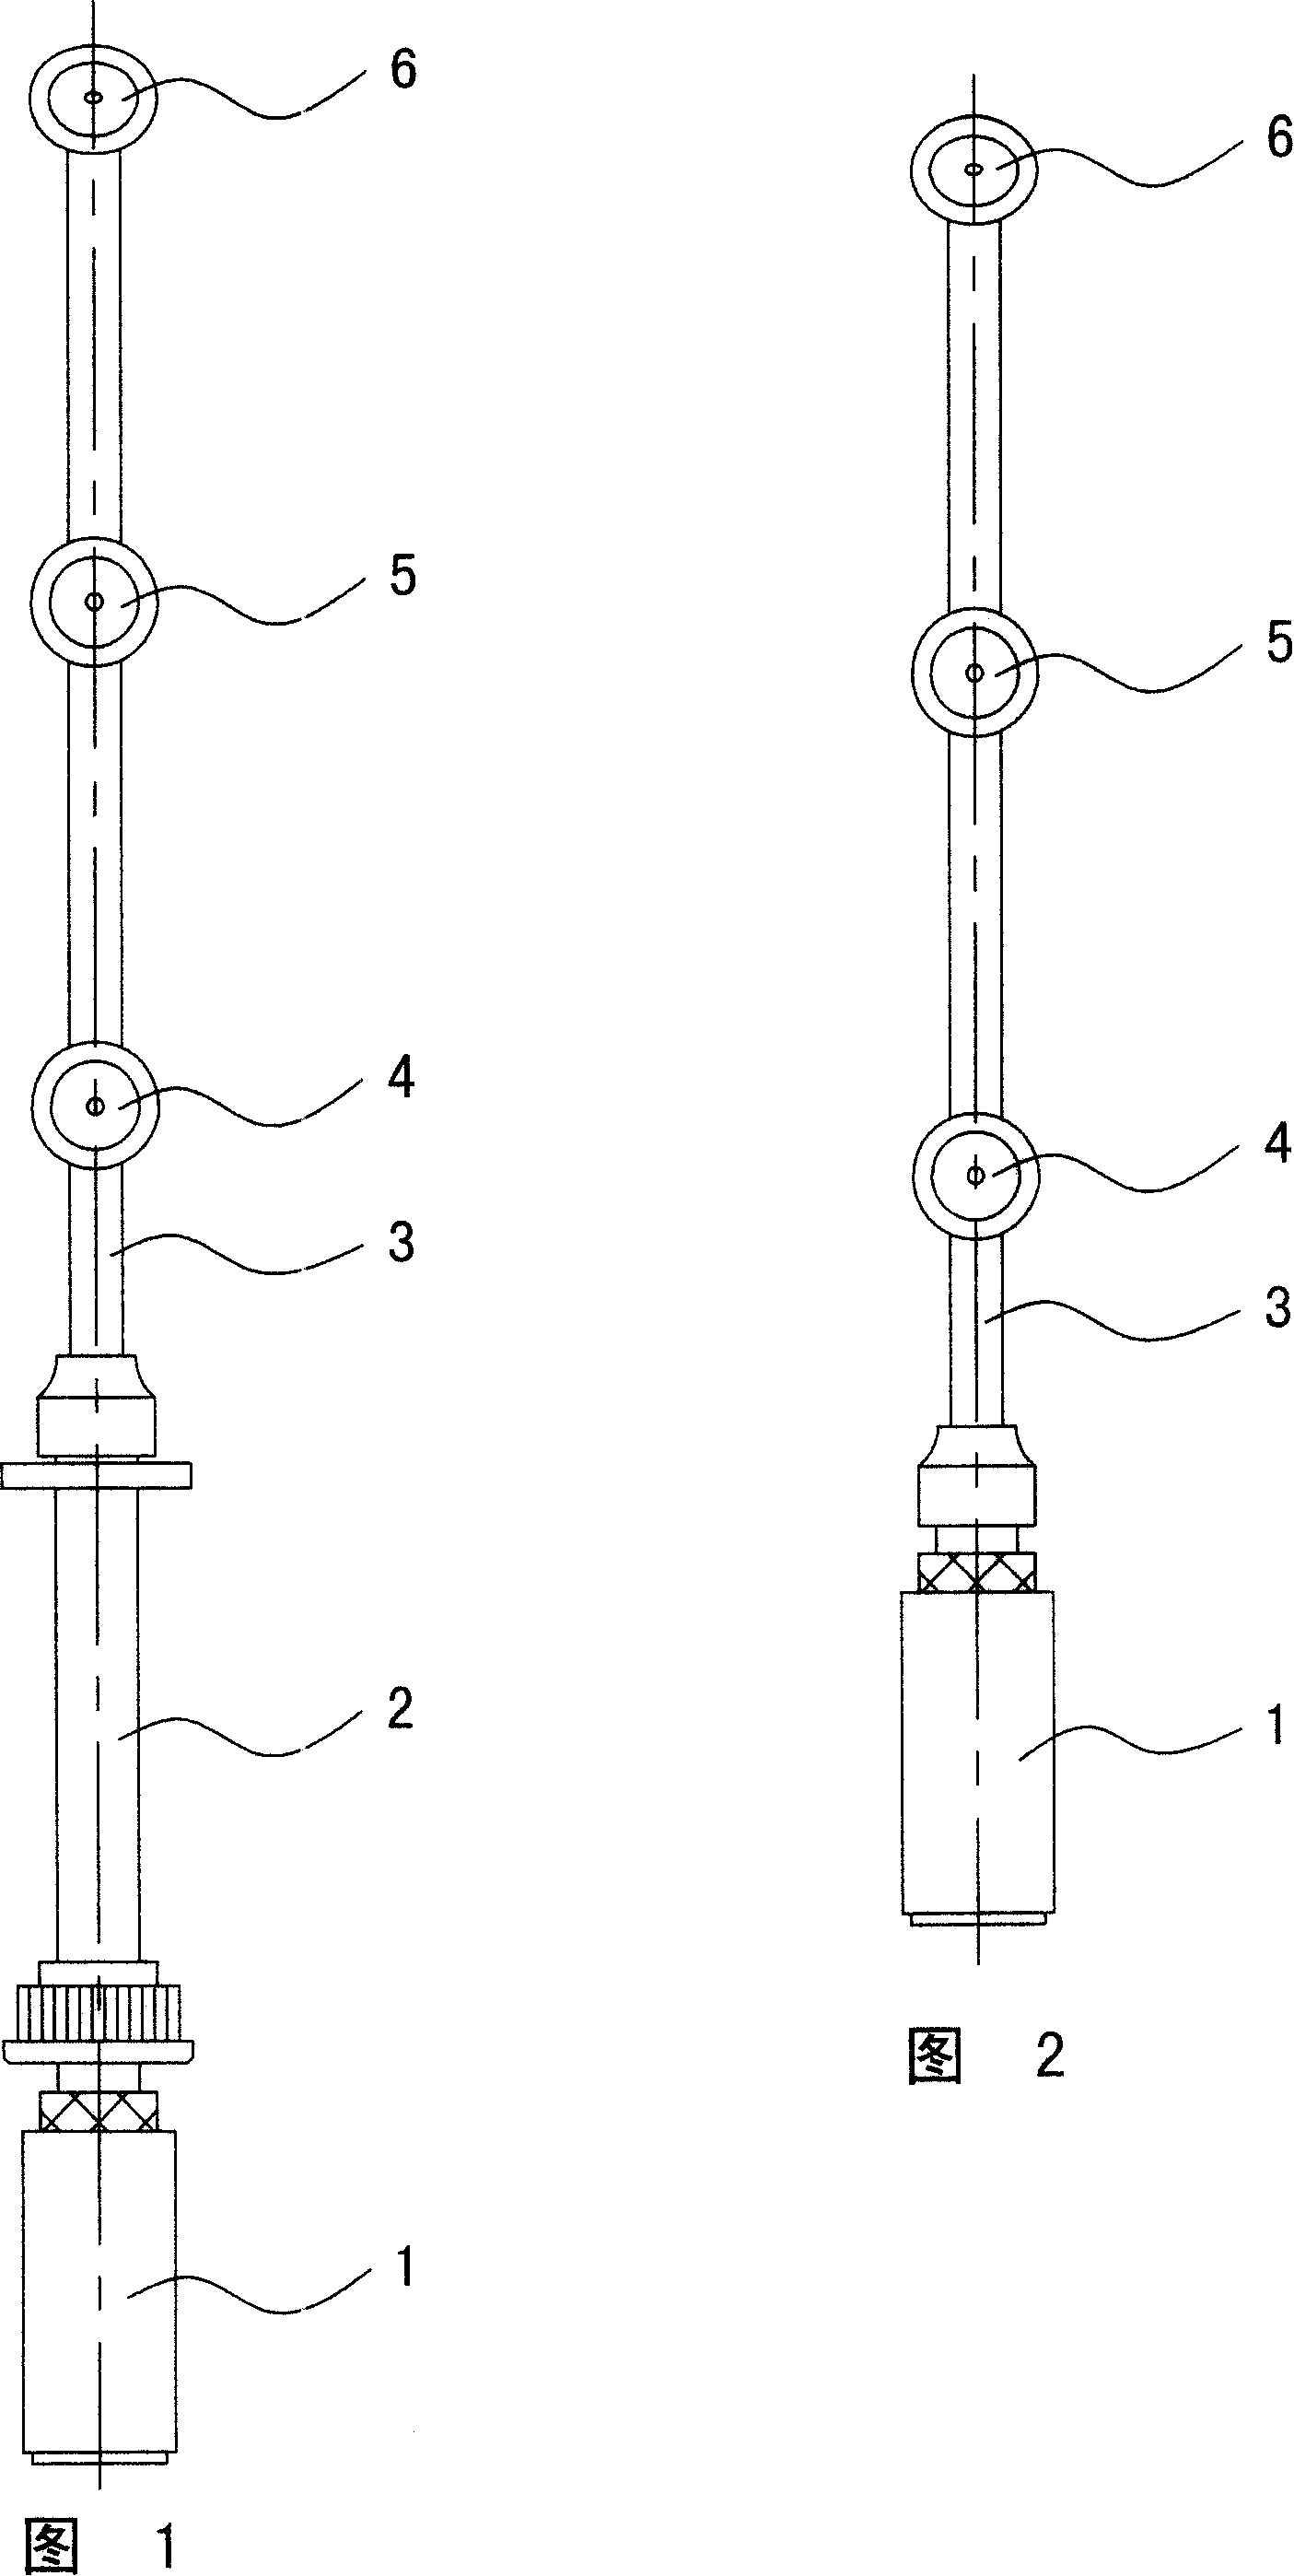 Multiple-nozzle chips connected in series multiple-segment spray lance of the vaporizer